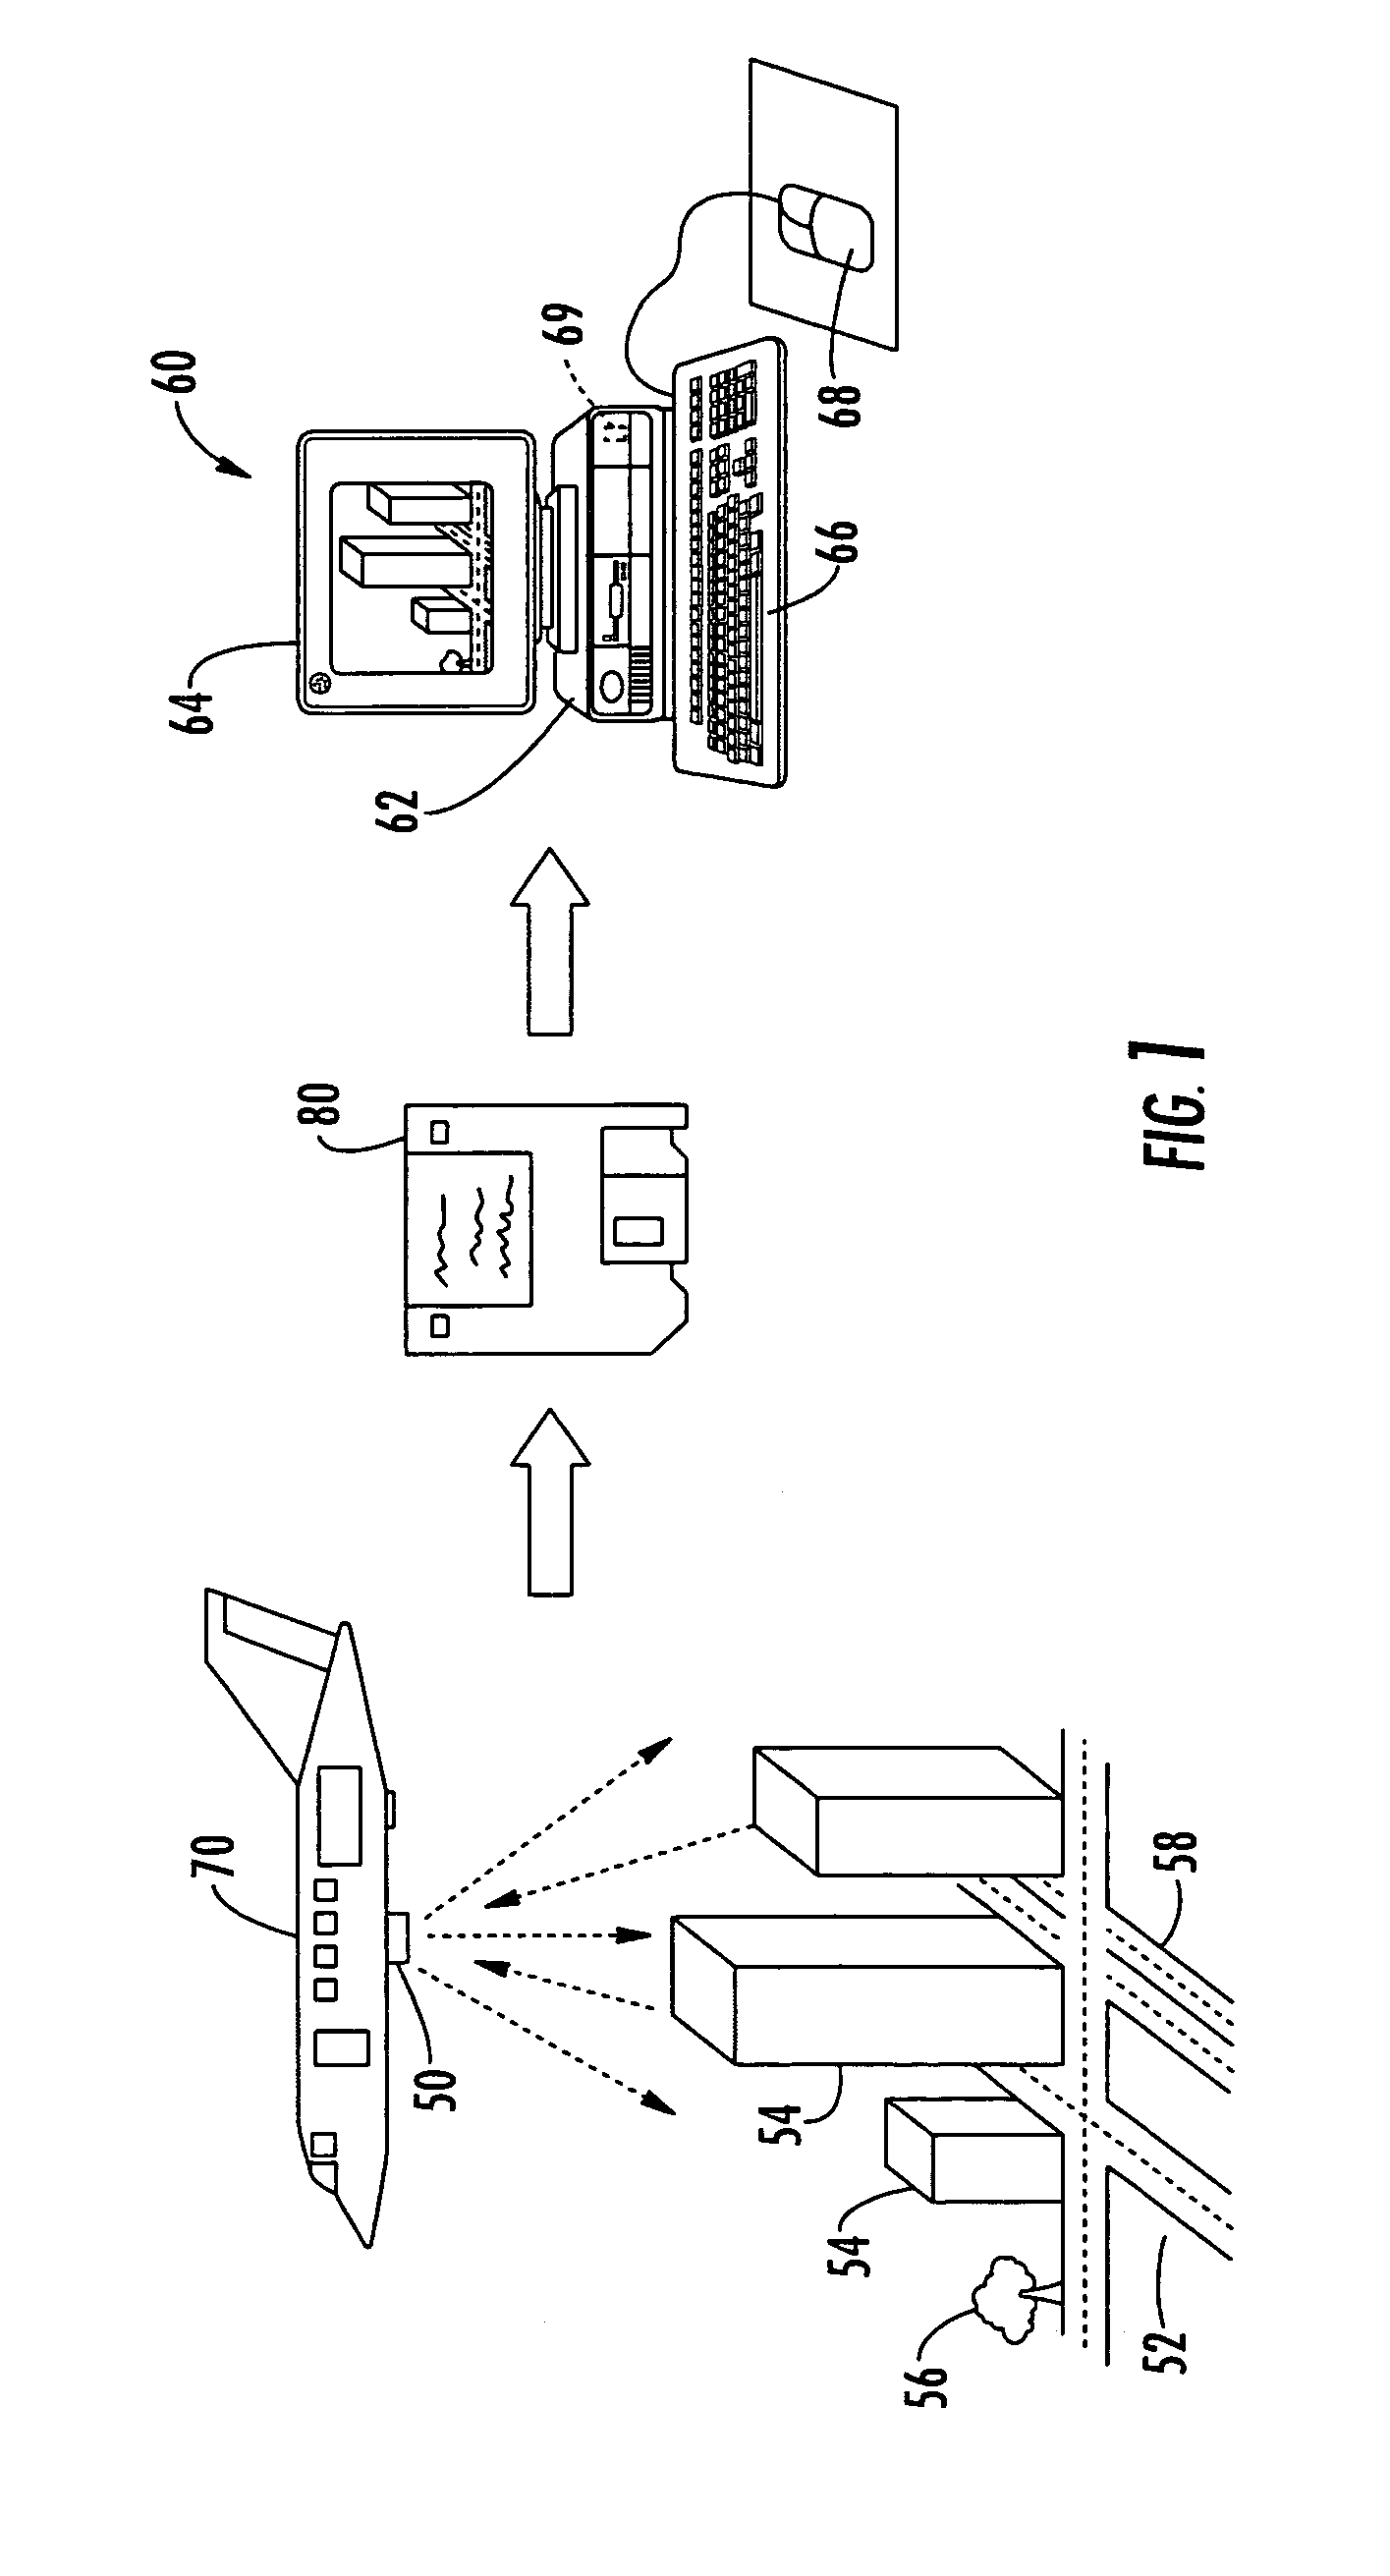 Method and apparatus for distinguishing foliage from buildings for topographical modeling